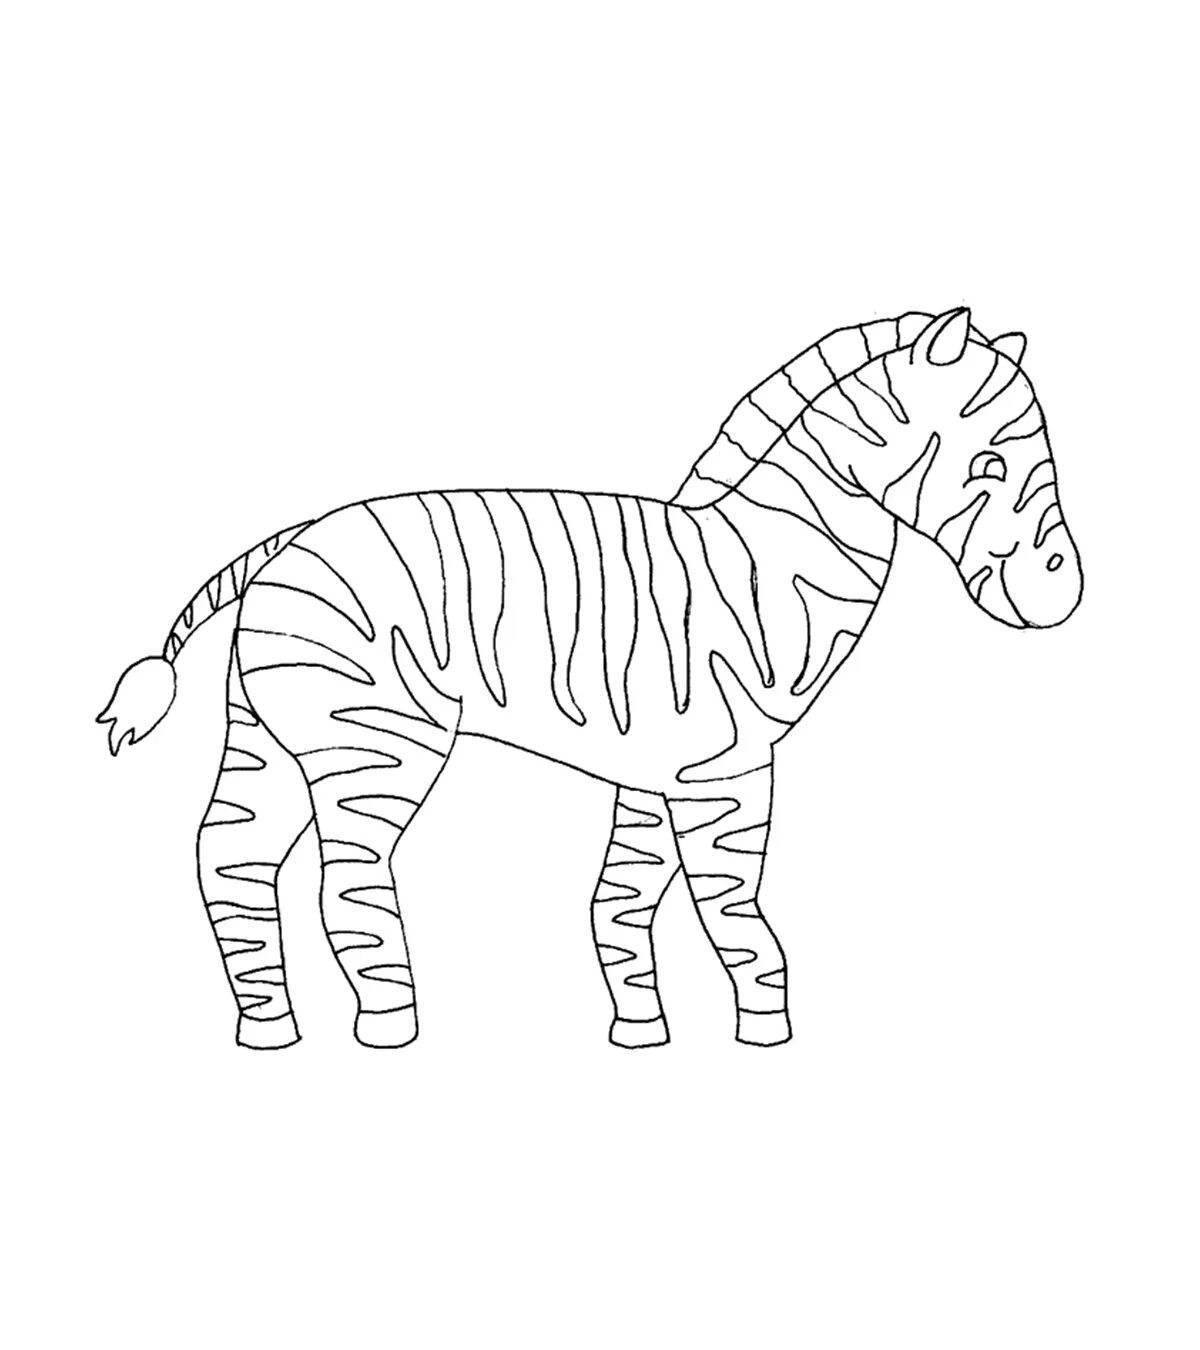 Adorable zebra coloring book for 3-4 year olds